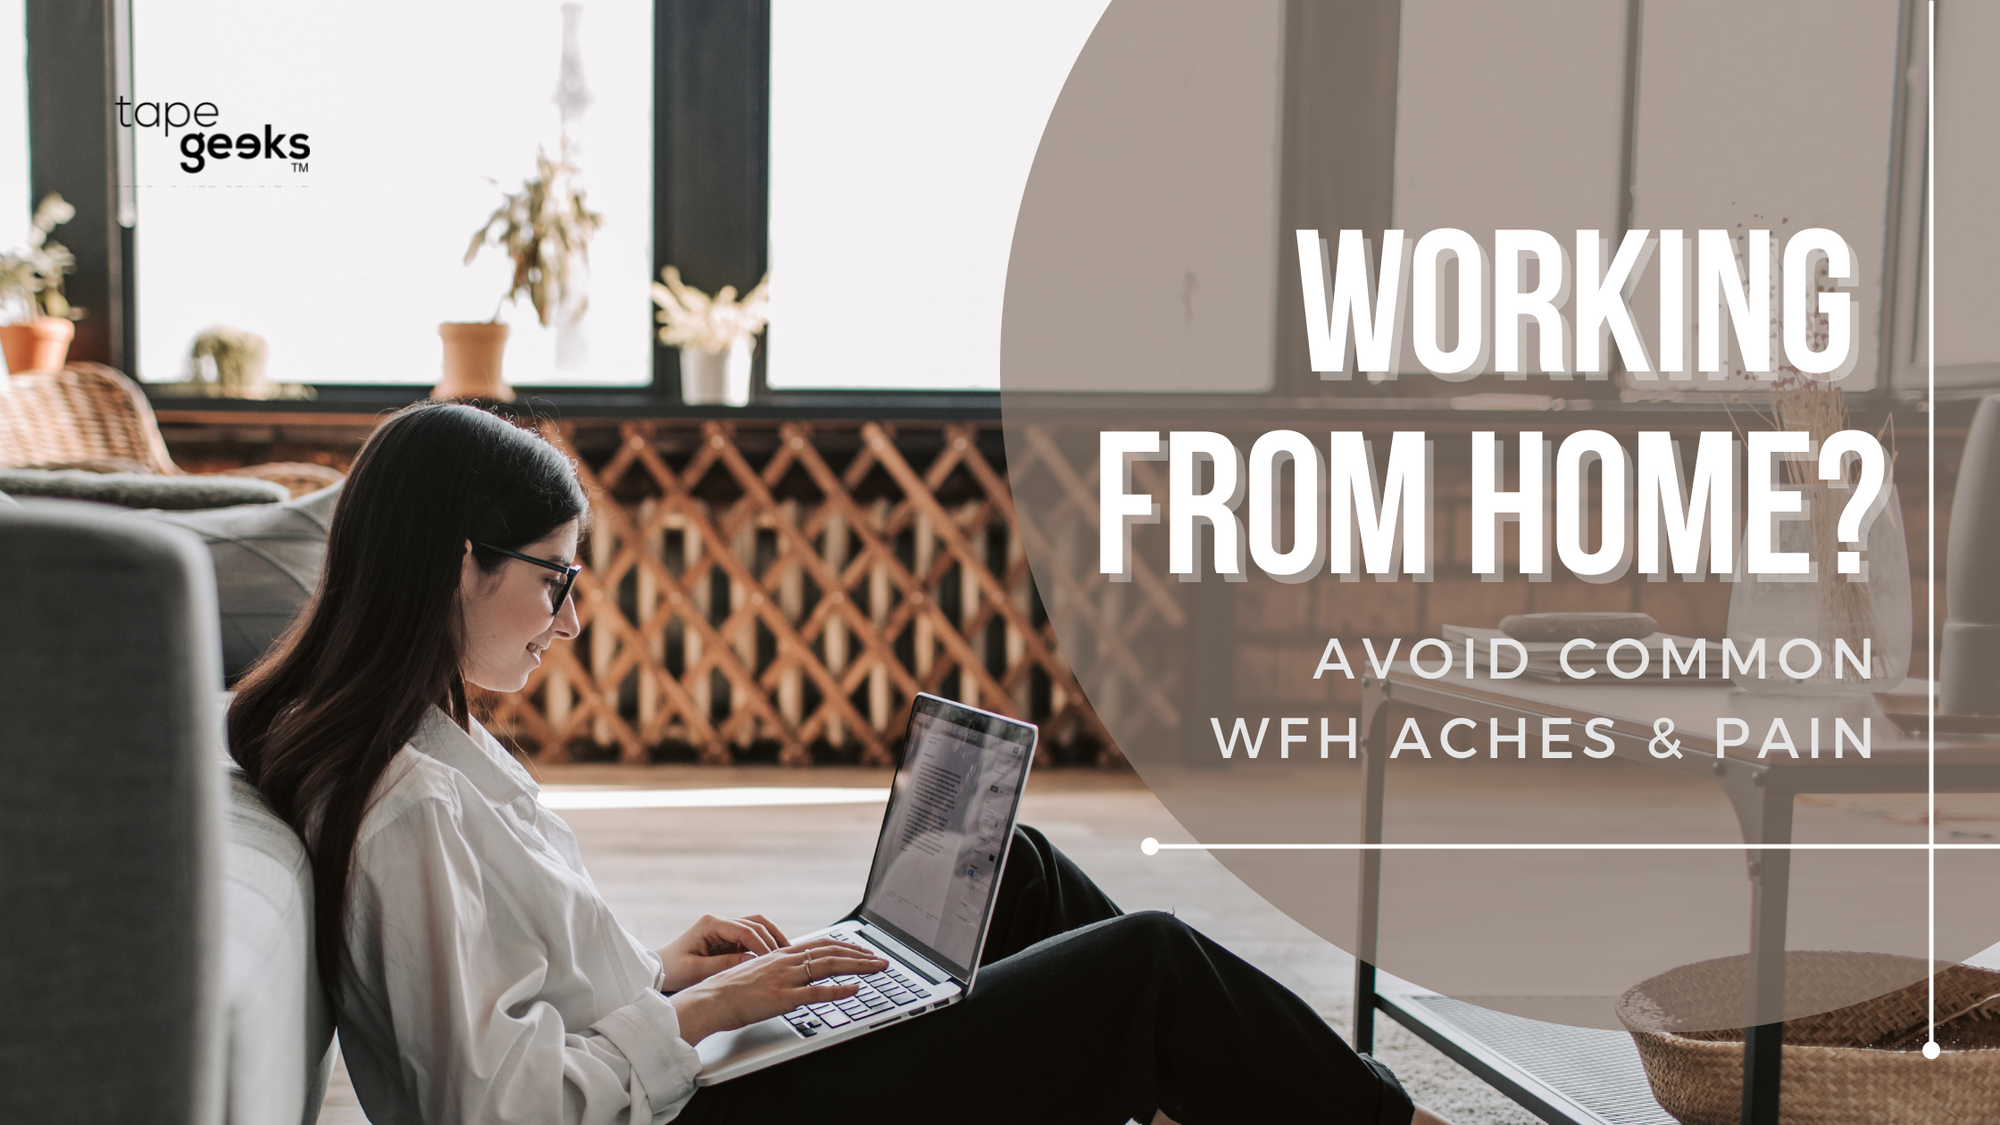 HOW TO DO PAIN MANAGEMENT WHEN WORKING FROM HOME